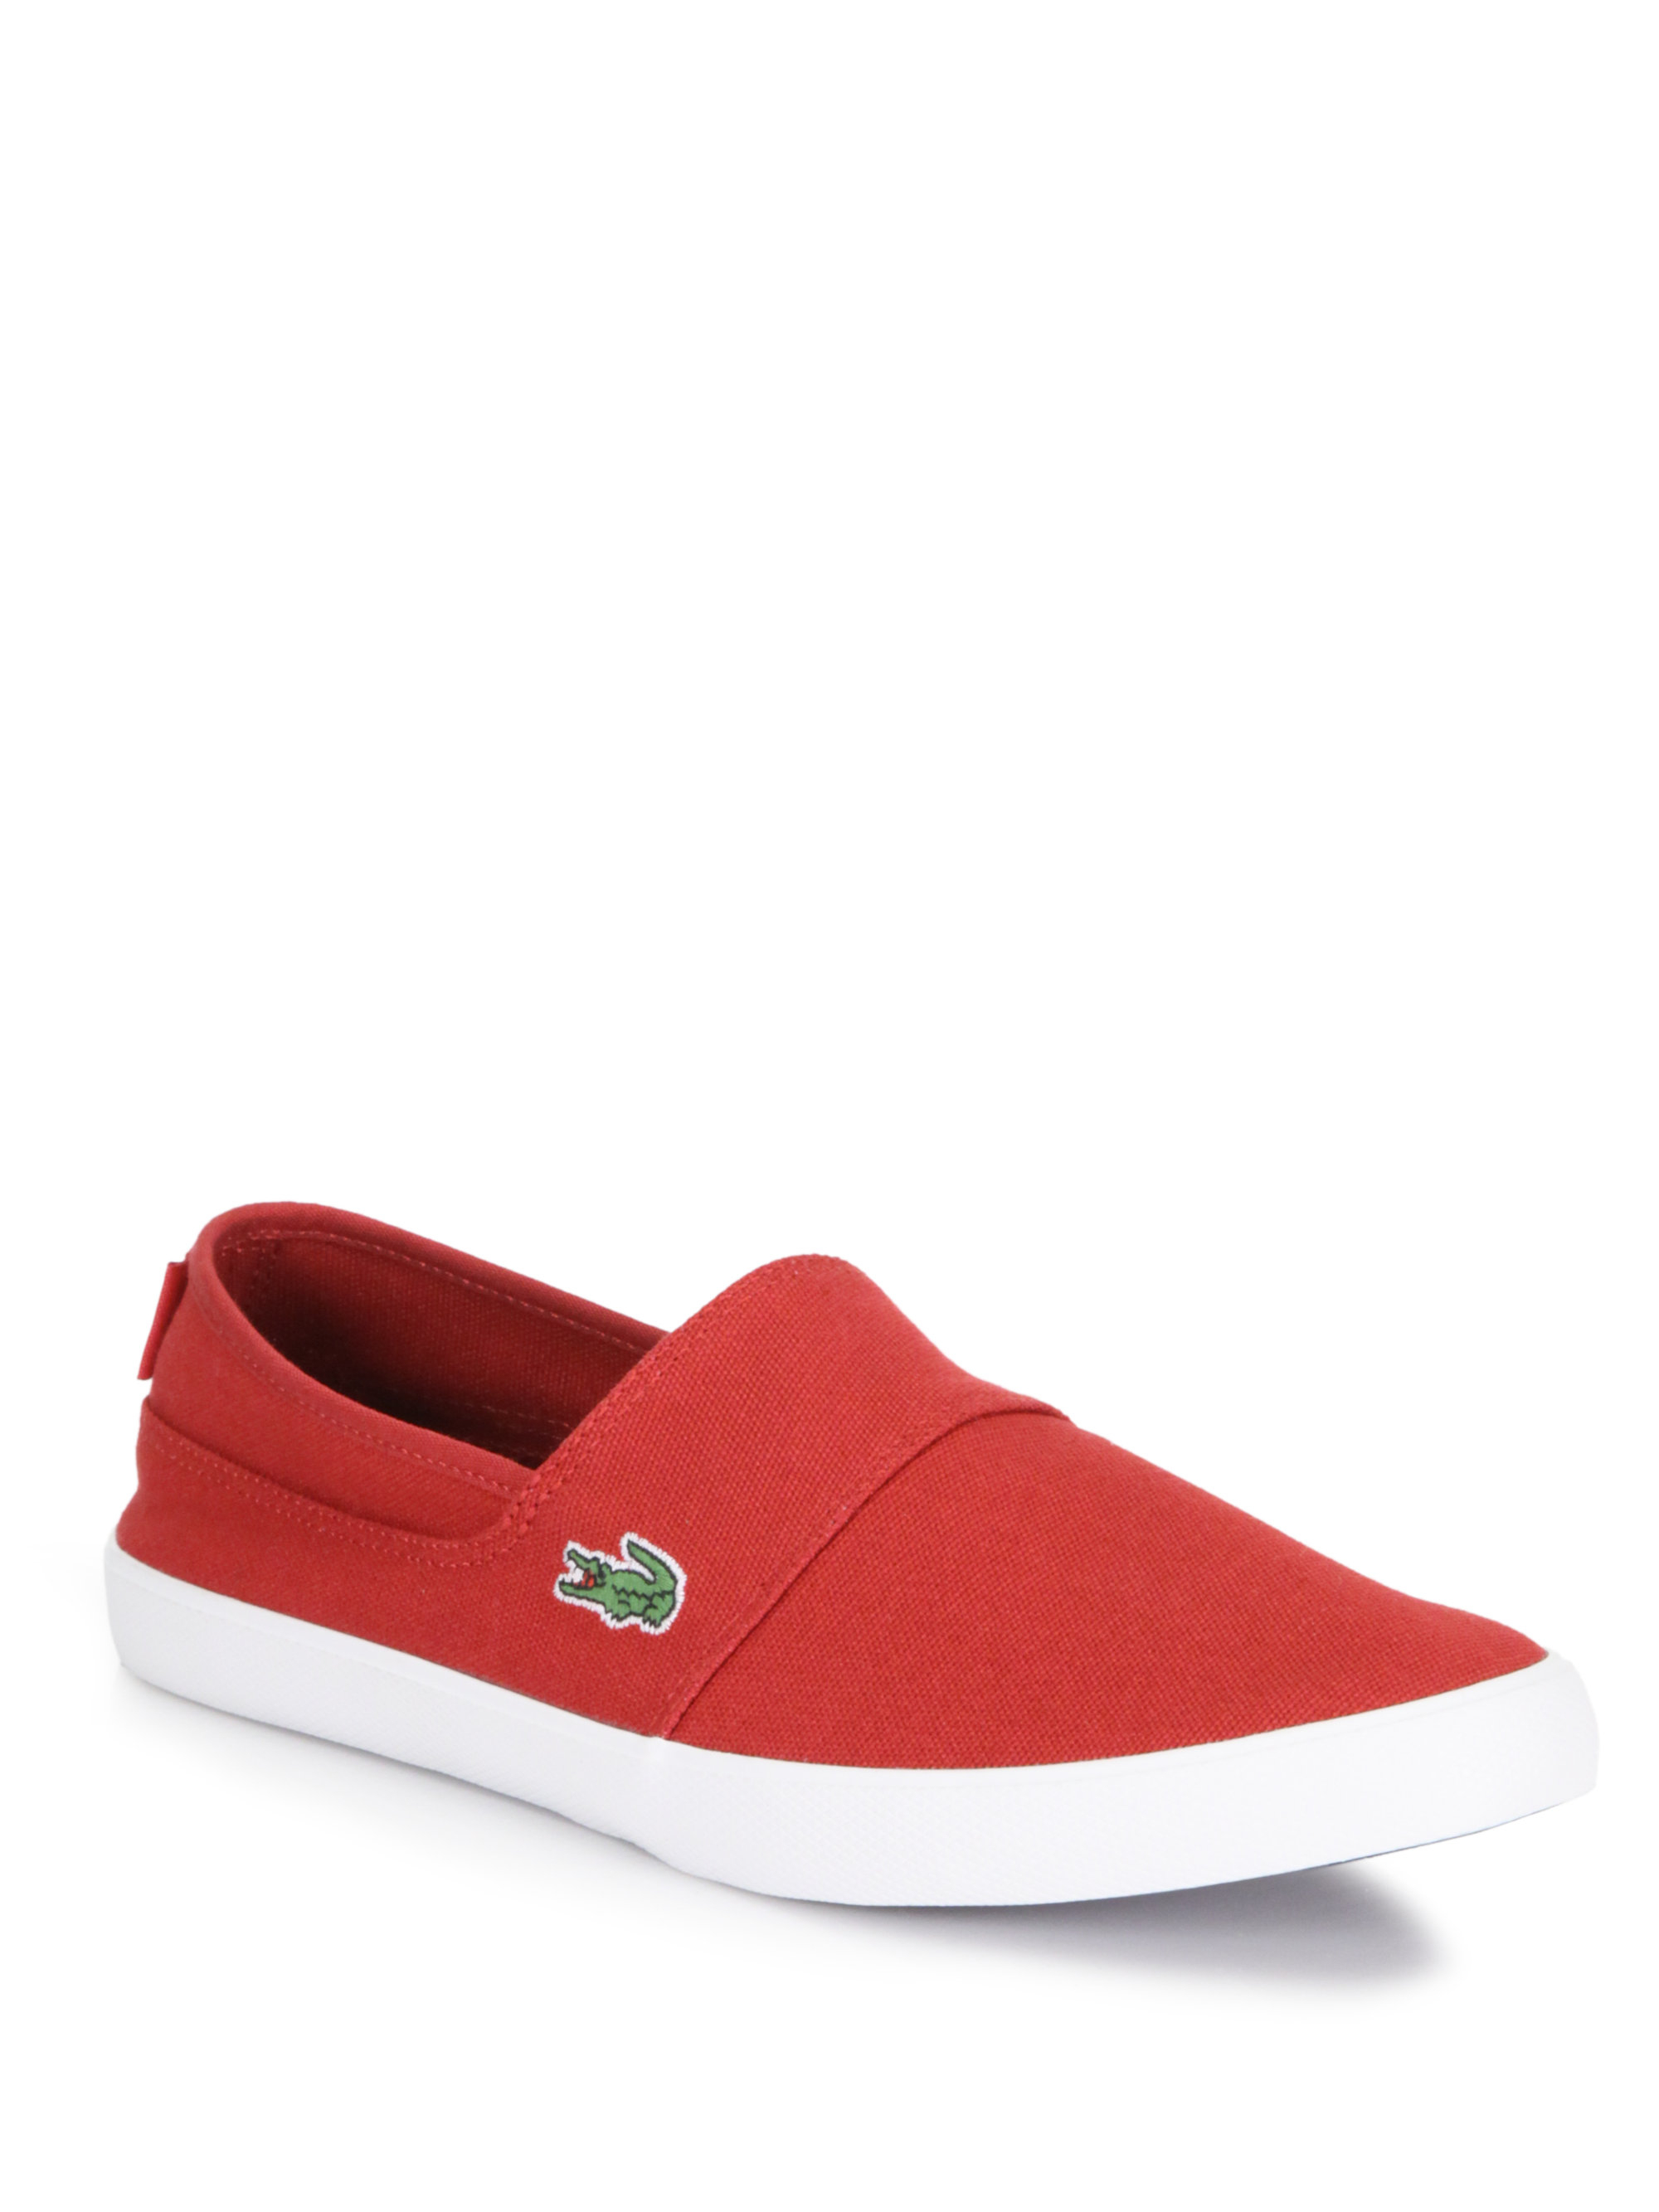 Lyst - Lacoste Maurice Slip-On Sneakers in Red for Men